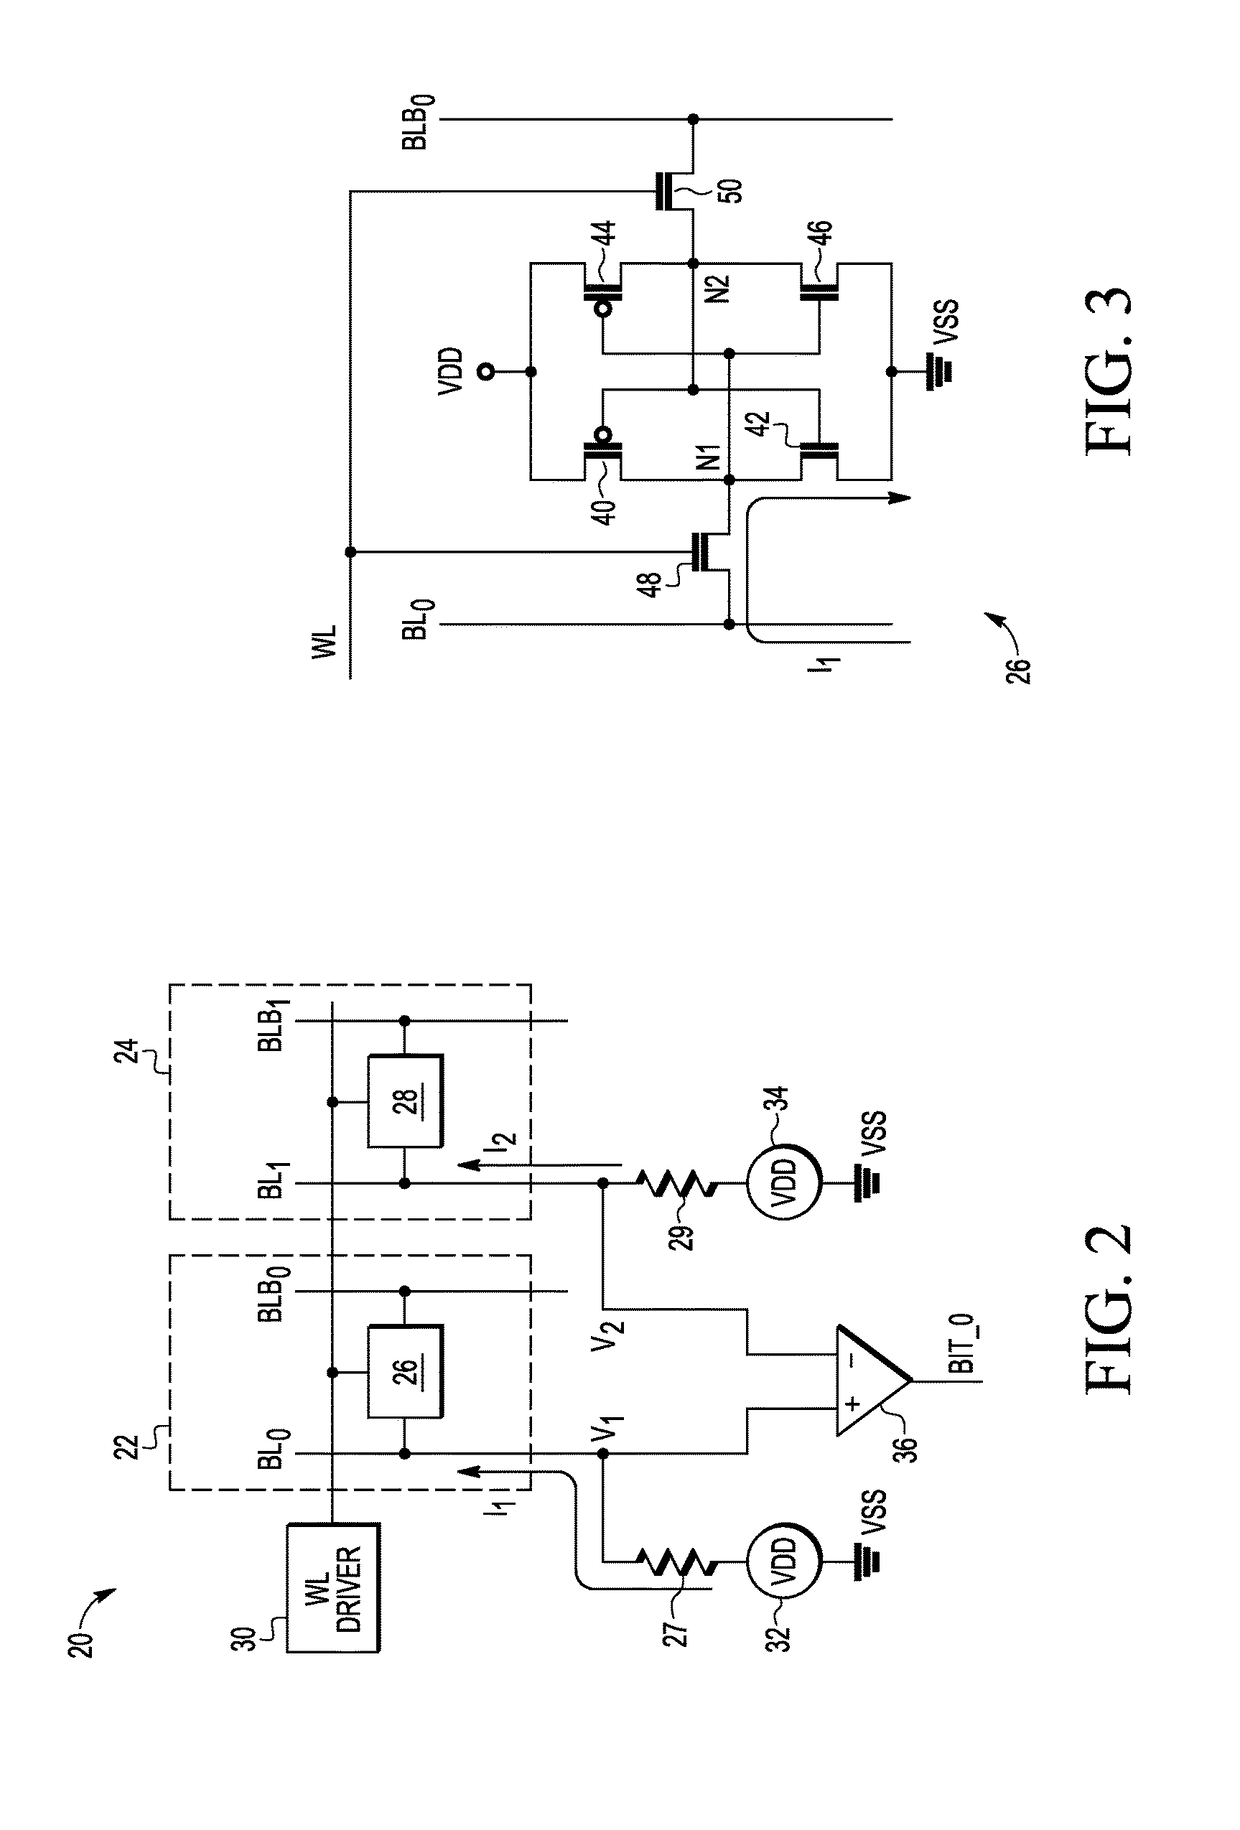 SRAM based physically unclonable function and method for generating a PUF response